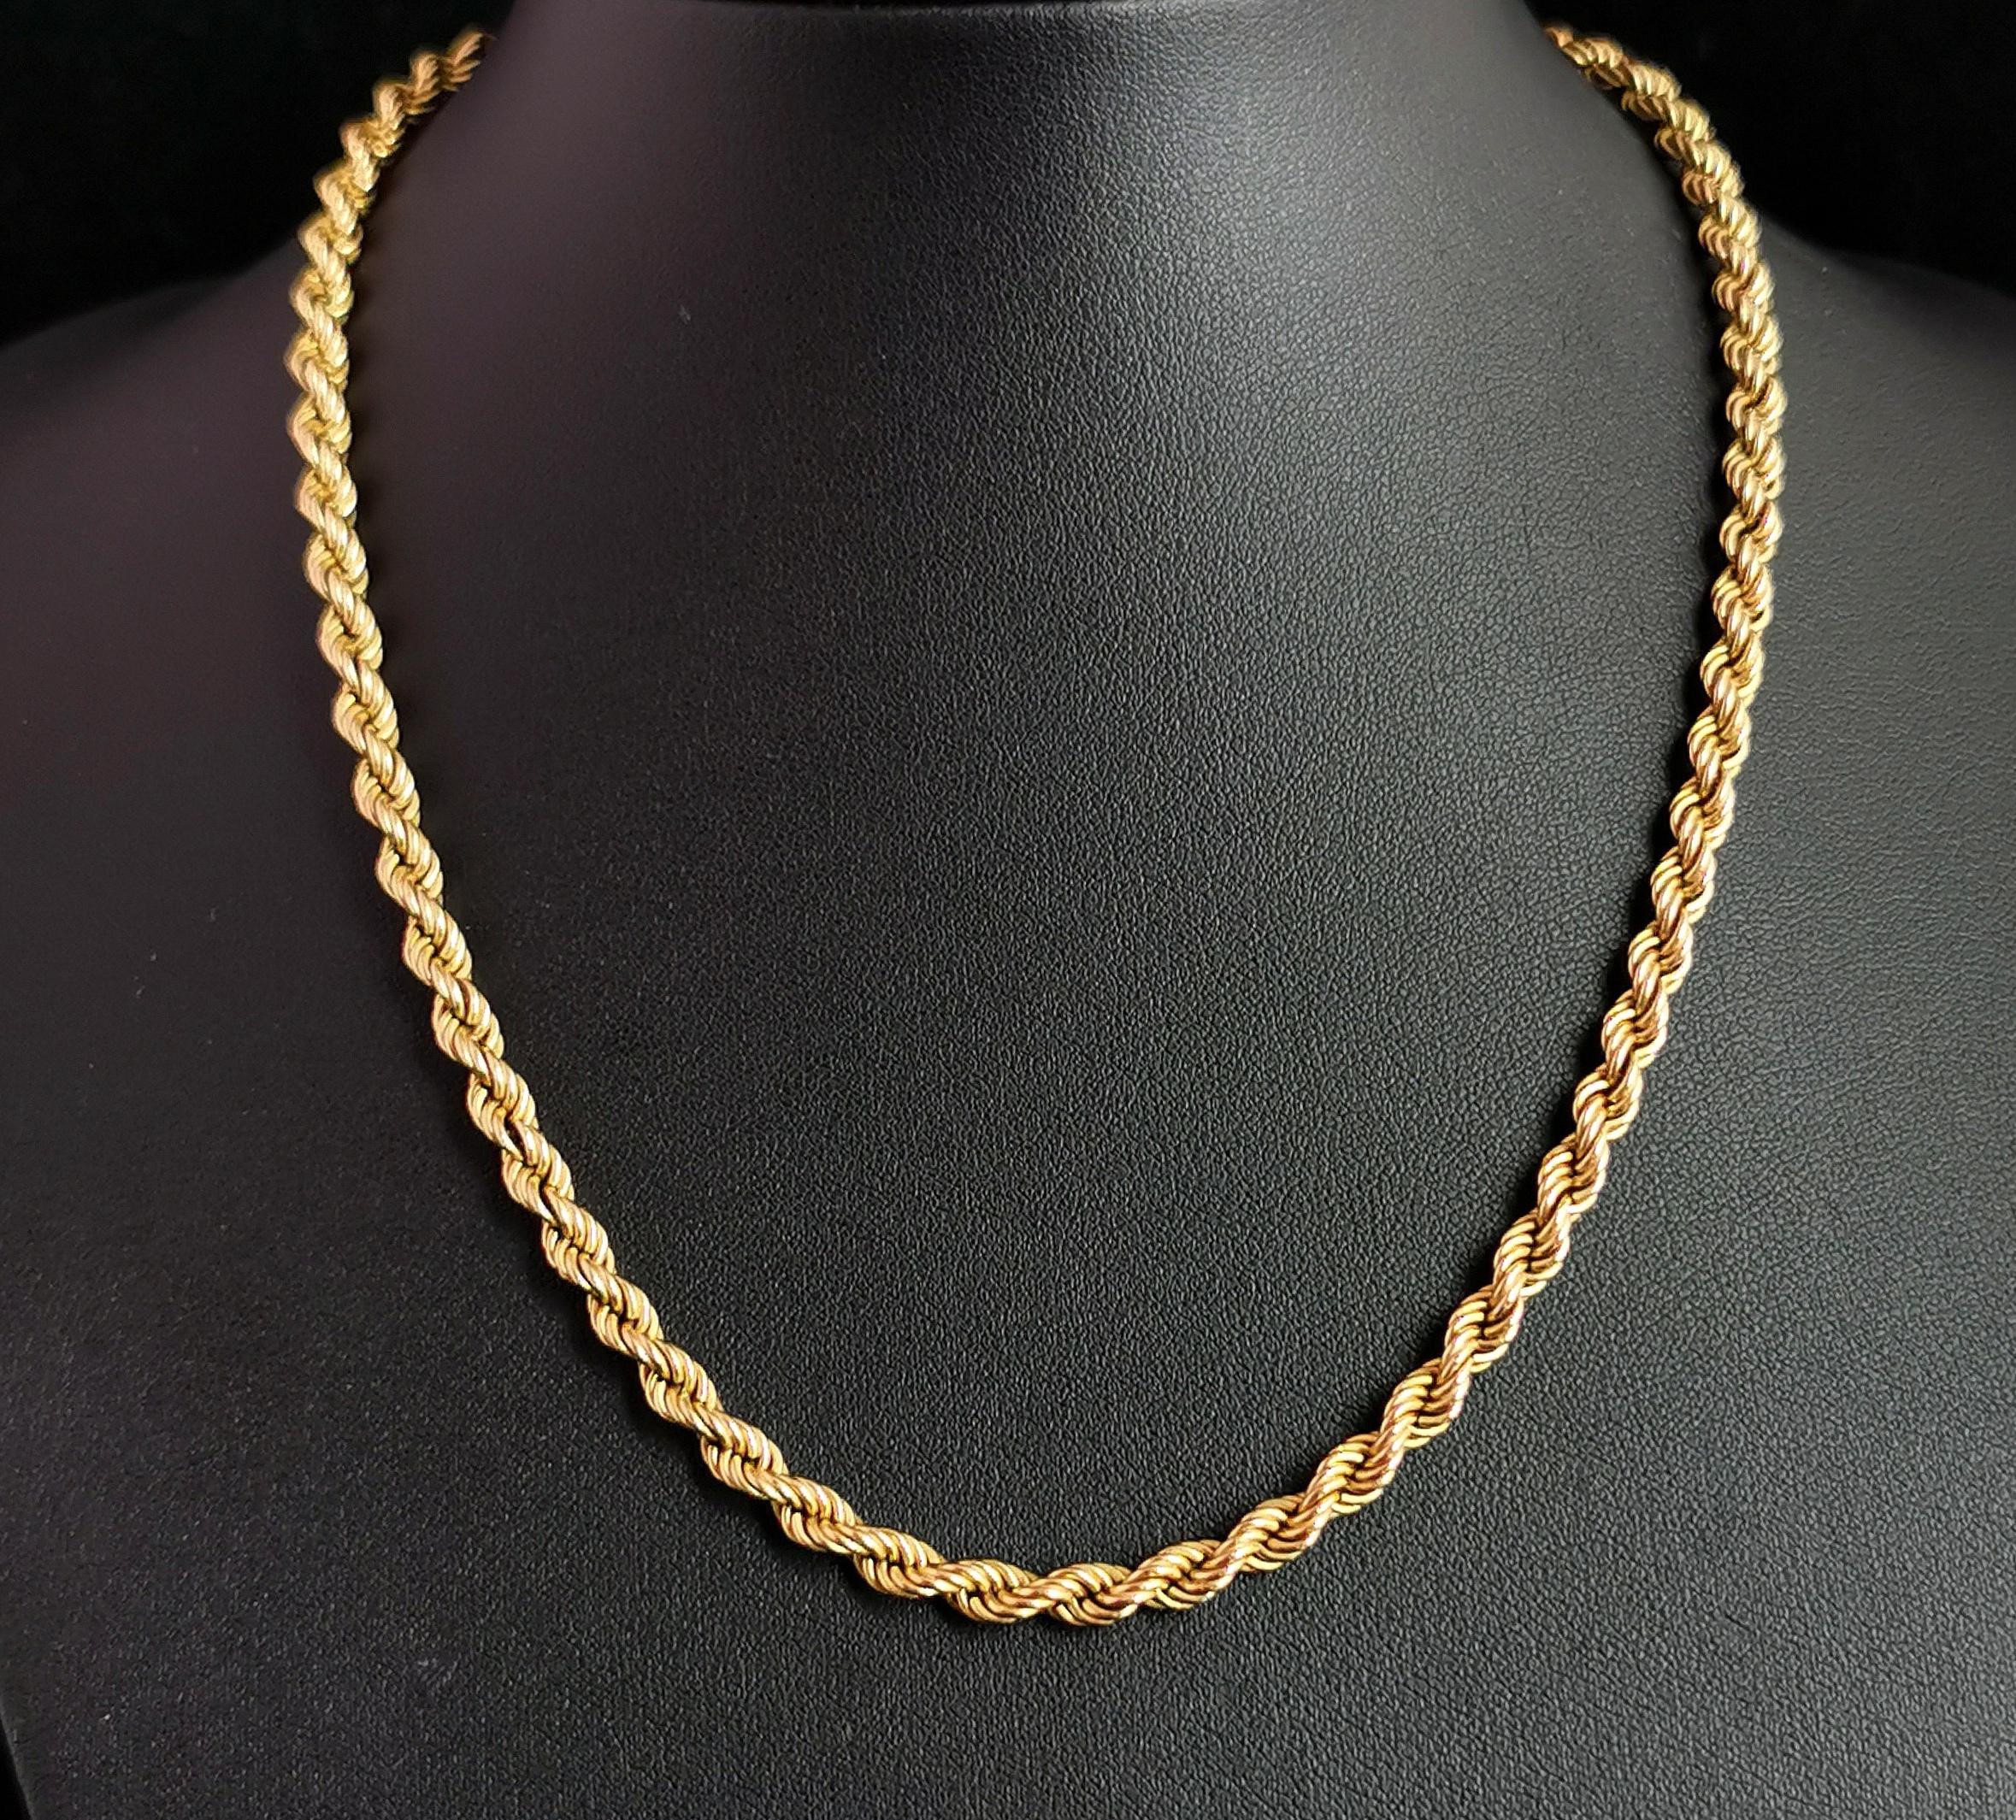 A gorgeous vintage 9kt gold rope Chain necklace.

This chain necklace has lovely chunky Rope twist links in a rich bloomed 9kt gold with a nice wearable length.

It has the look of a heavy chain with the large rope twist but is nice and lightweight